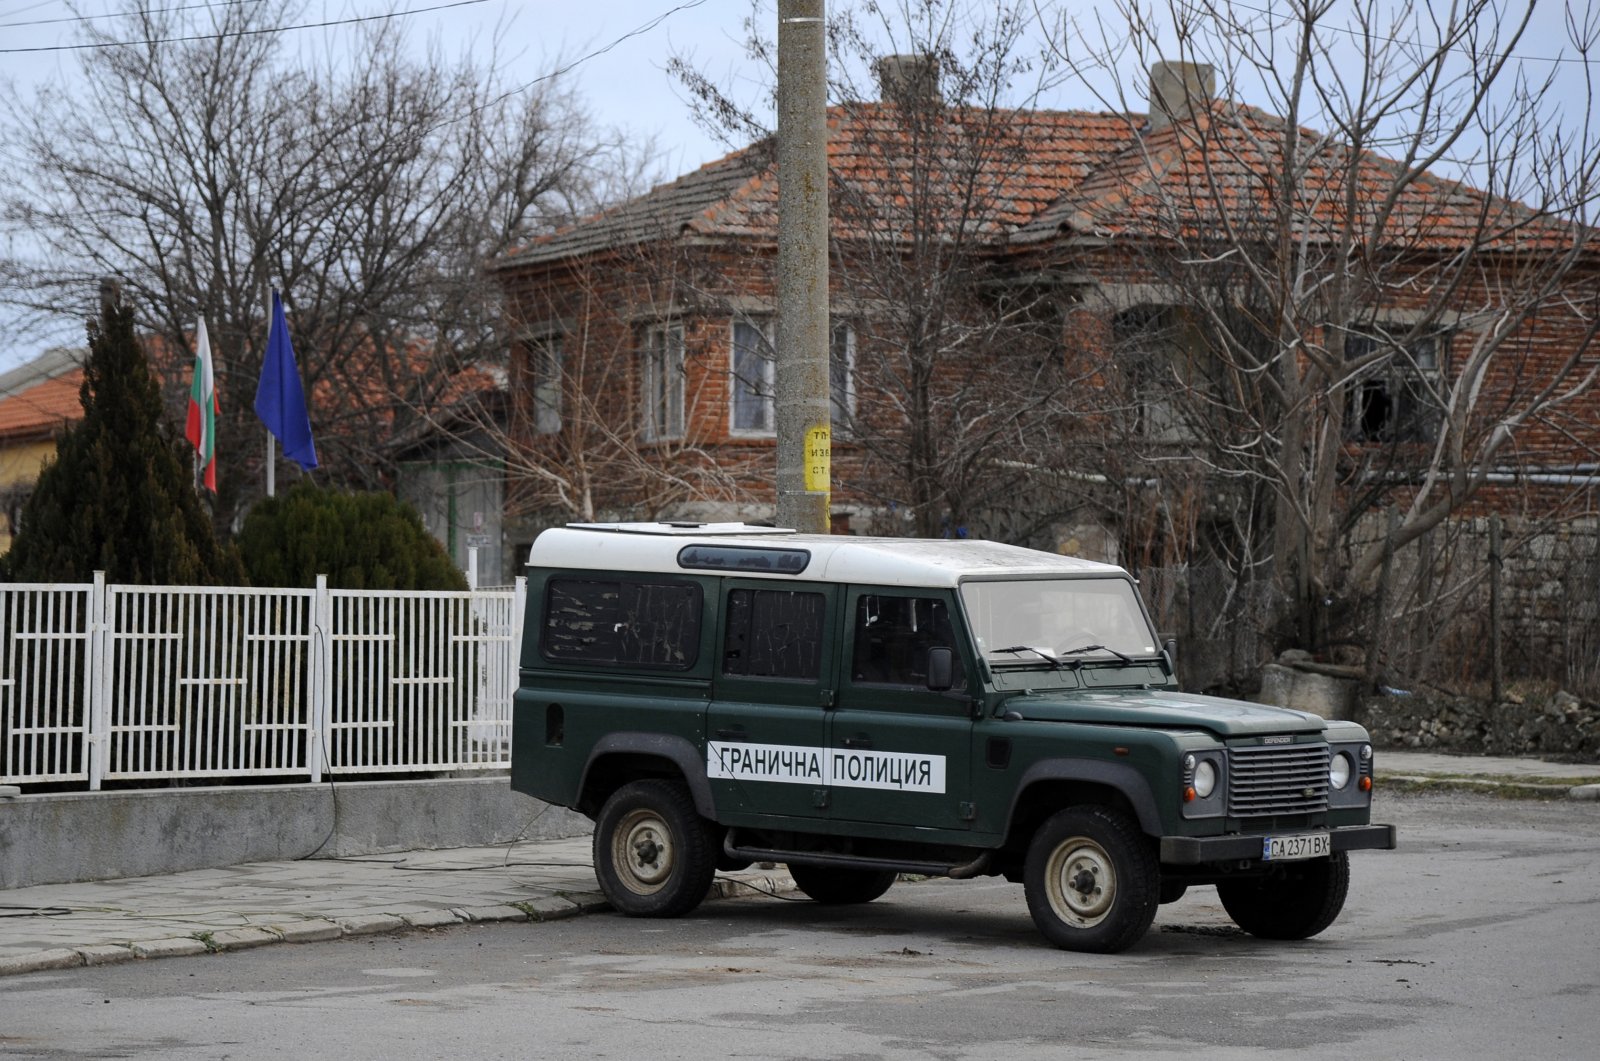 Border police vehicle is seen in the village of Shtit in Bulgaria, near the border with Turkey, Feb. 29, 2020. (AP File Photo)